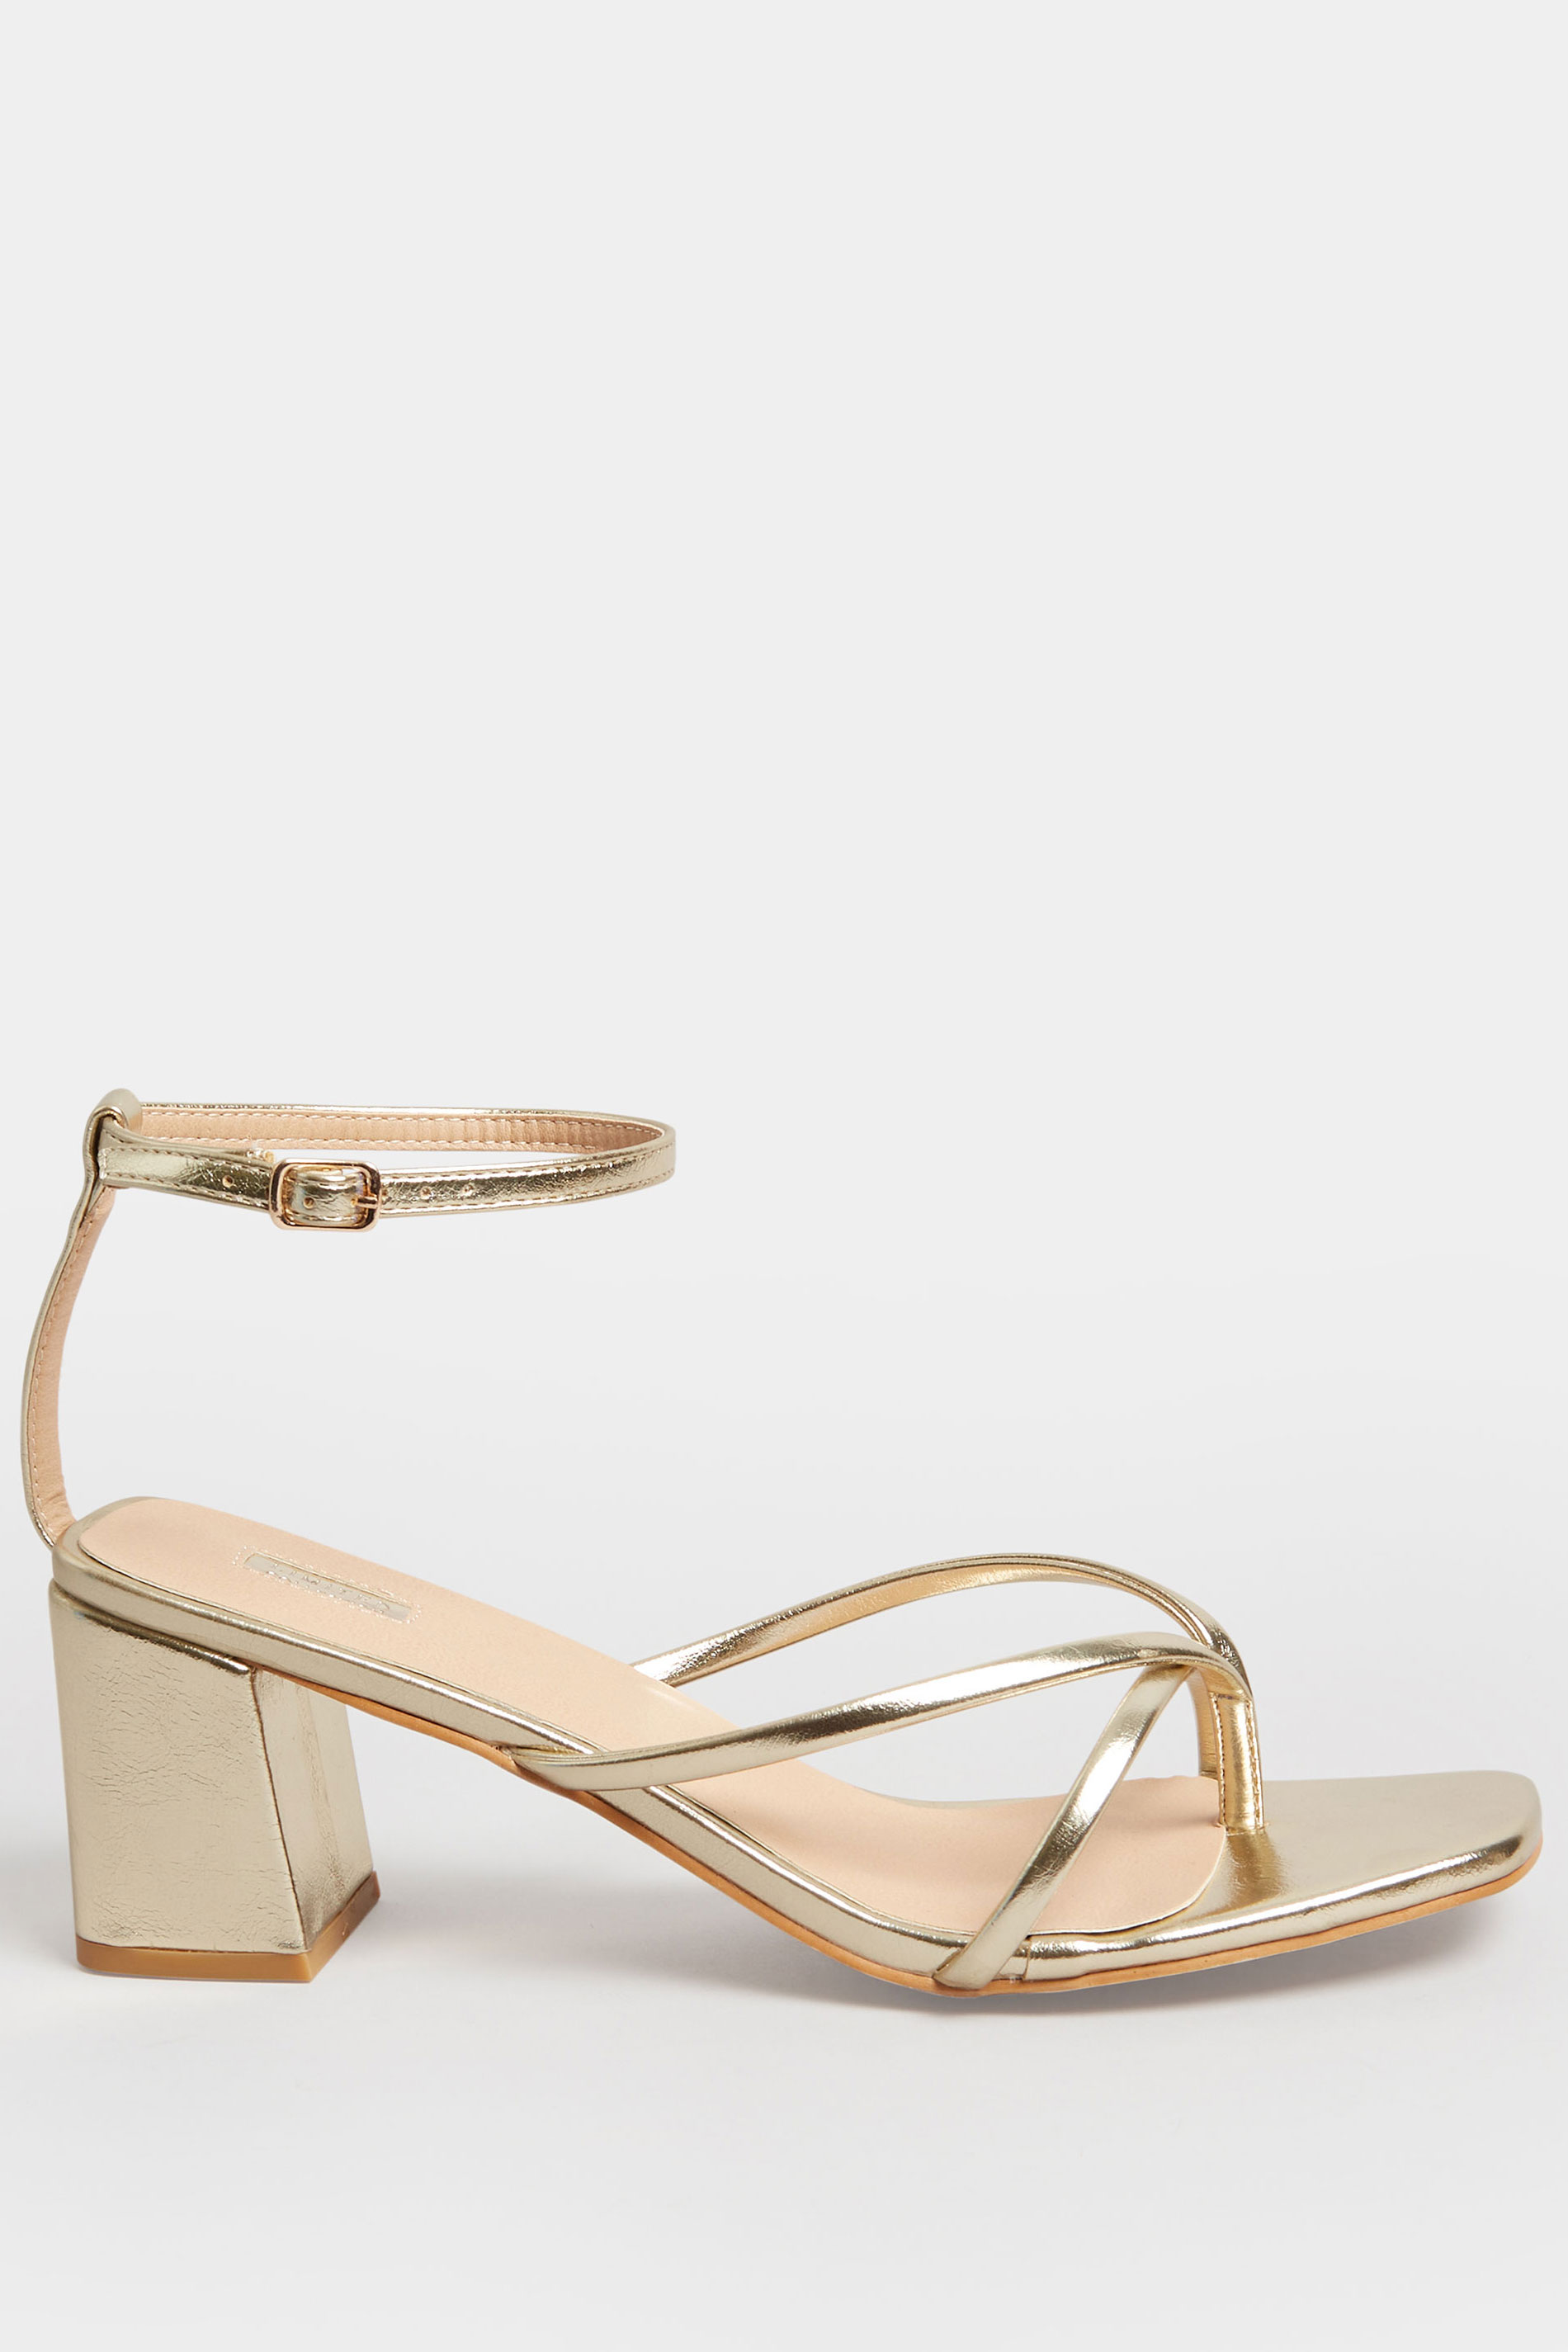 LIMITED COLLECTION Gold Mid Toe Post Heeled Sandals In Extra Wide EEE Fit | Yours Clothing 3